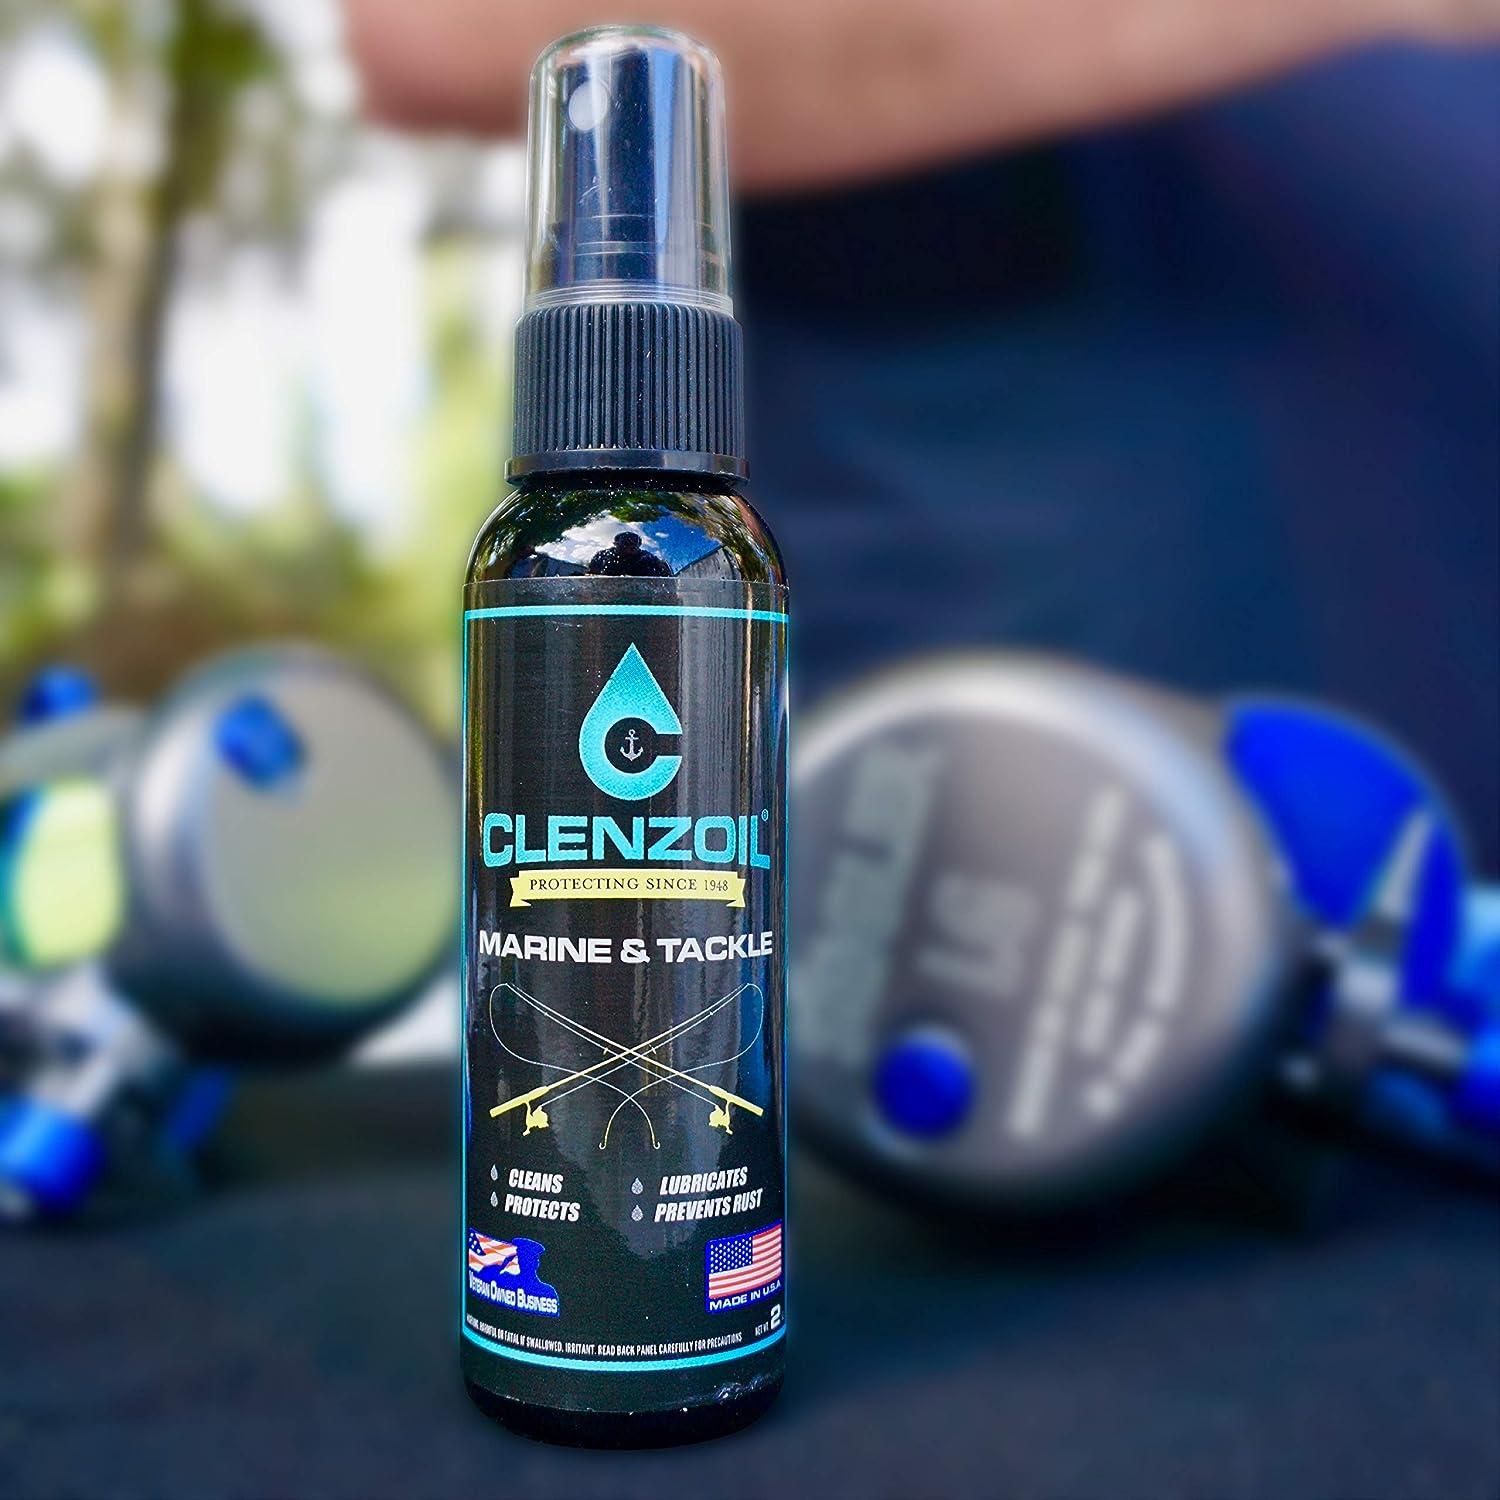 Clenzoil Marine & Tackle 2 oz. Fishing Reel Cleaner & Bearing Lube Spray  Bottle  One-Step Cleaner, Lubricant, Protectant CLP Cleaning + Lubricating  Oil in One Solution